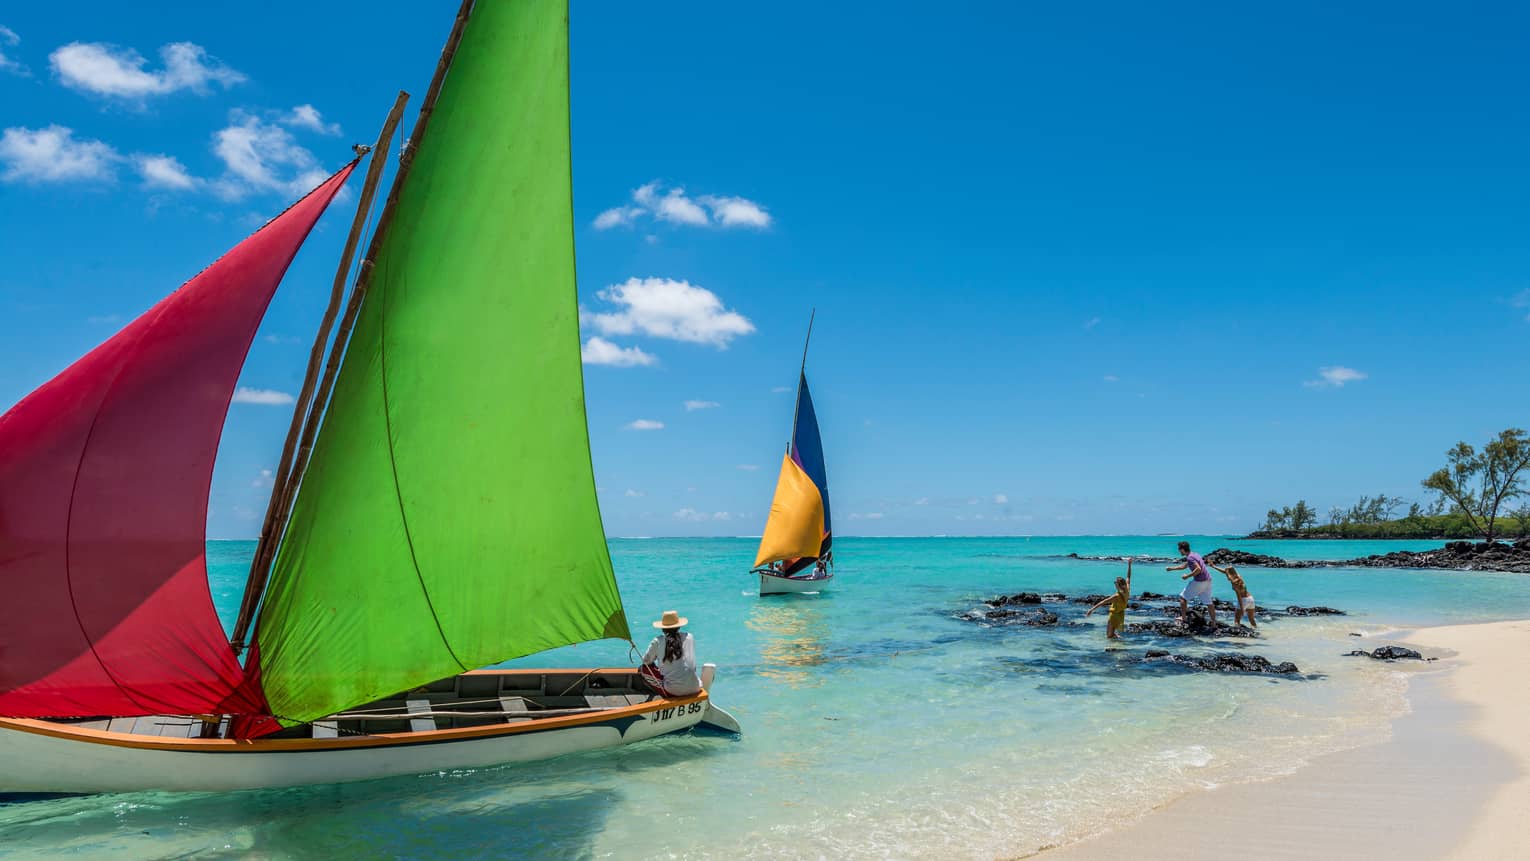 Family plays on beach, rocks in front of two sailboats with colourful sails